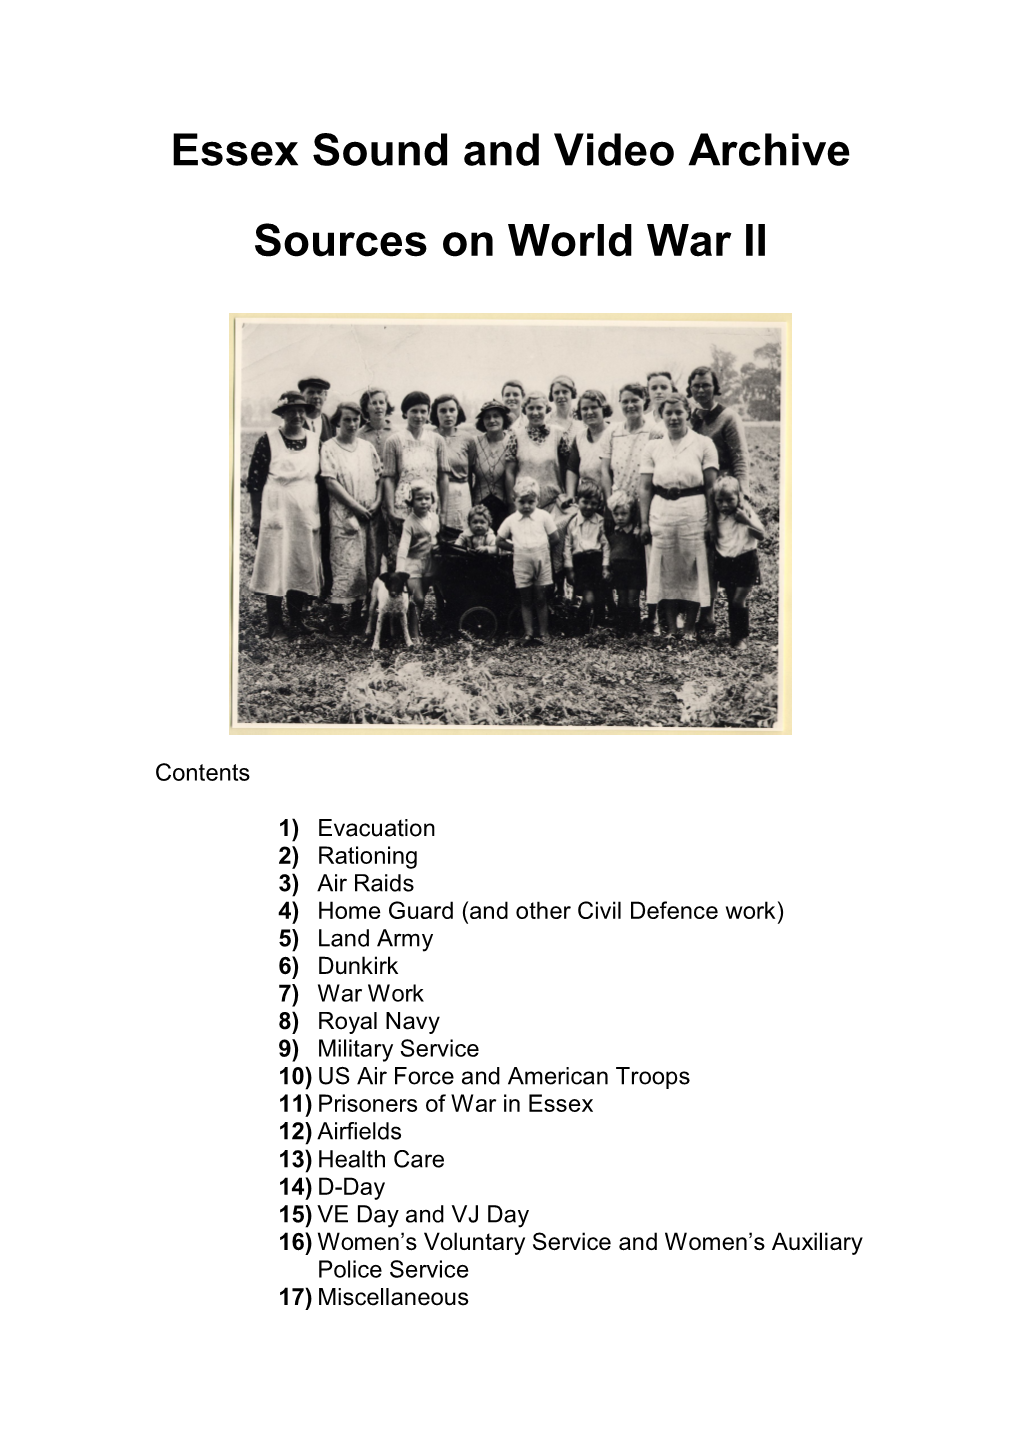 Essex Sound and Video Archive Sources on World War II